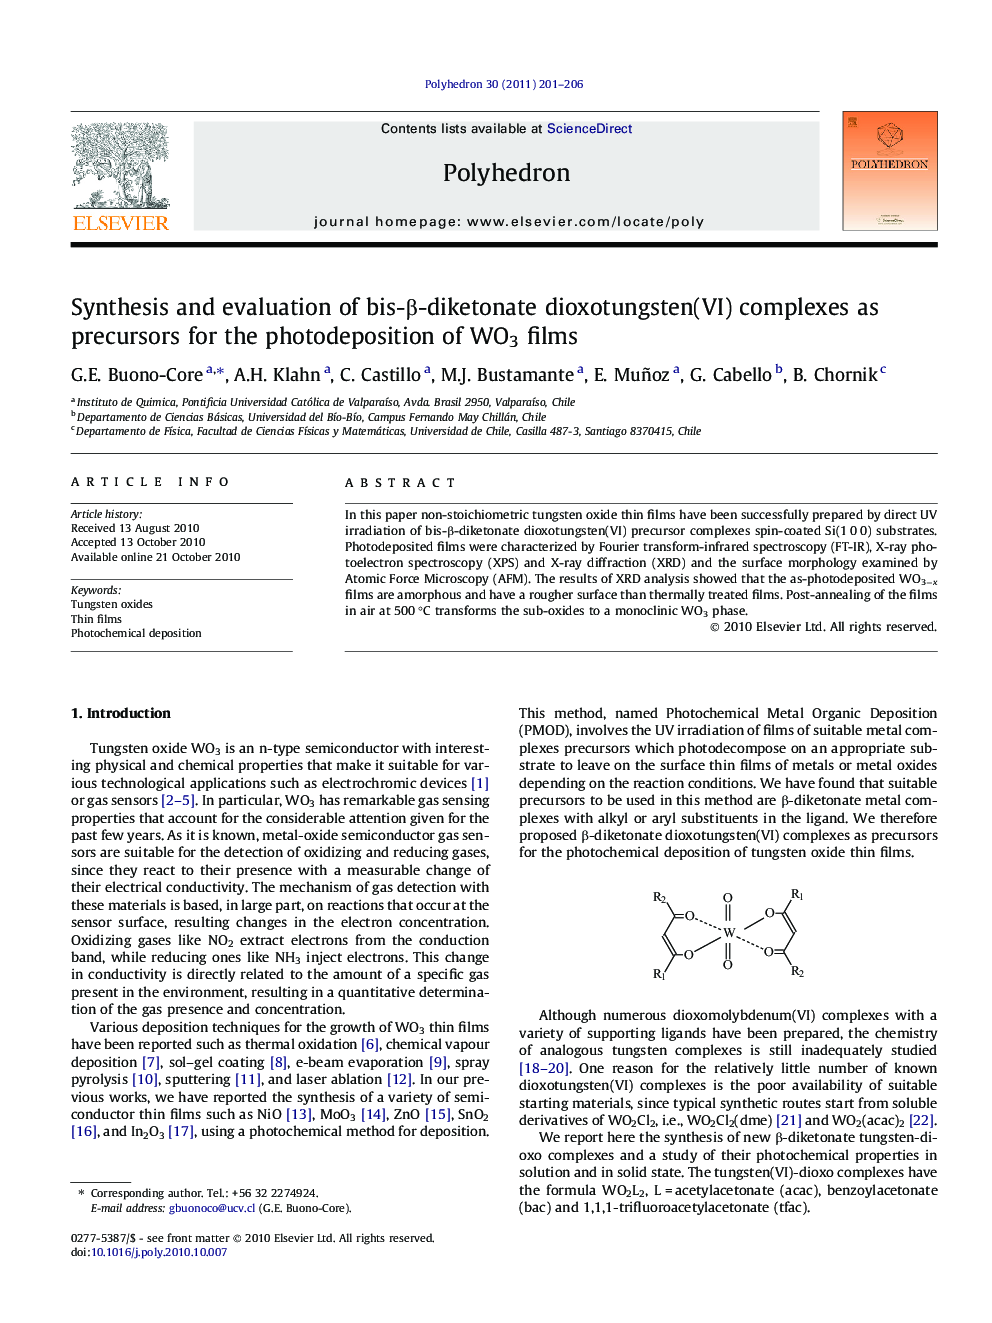 Synthesis and evaluation of bis-β-diketonate dioxotungsten(VI) complexes as precursors for the photodeposition of WO3 films